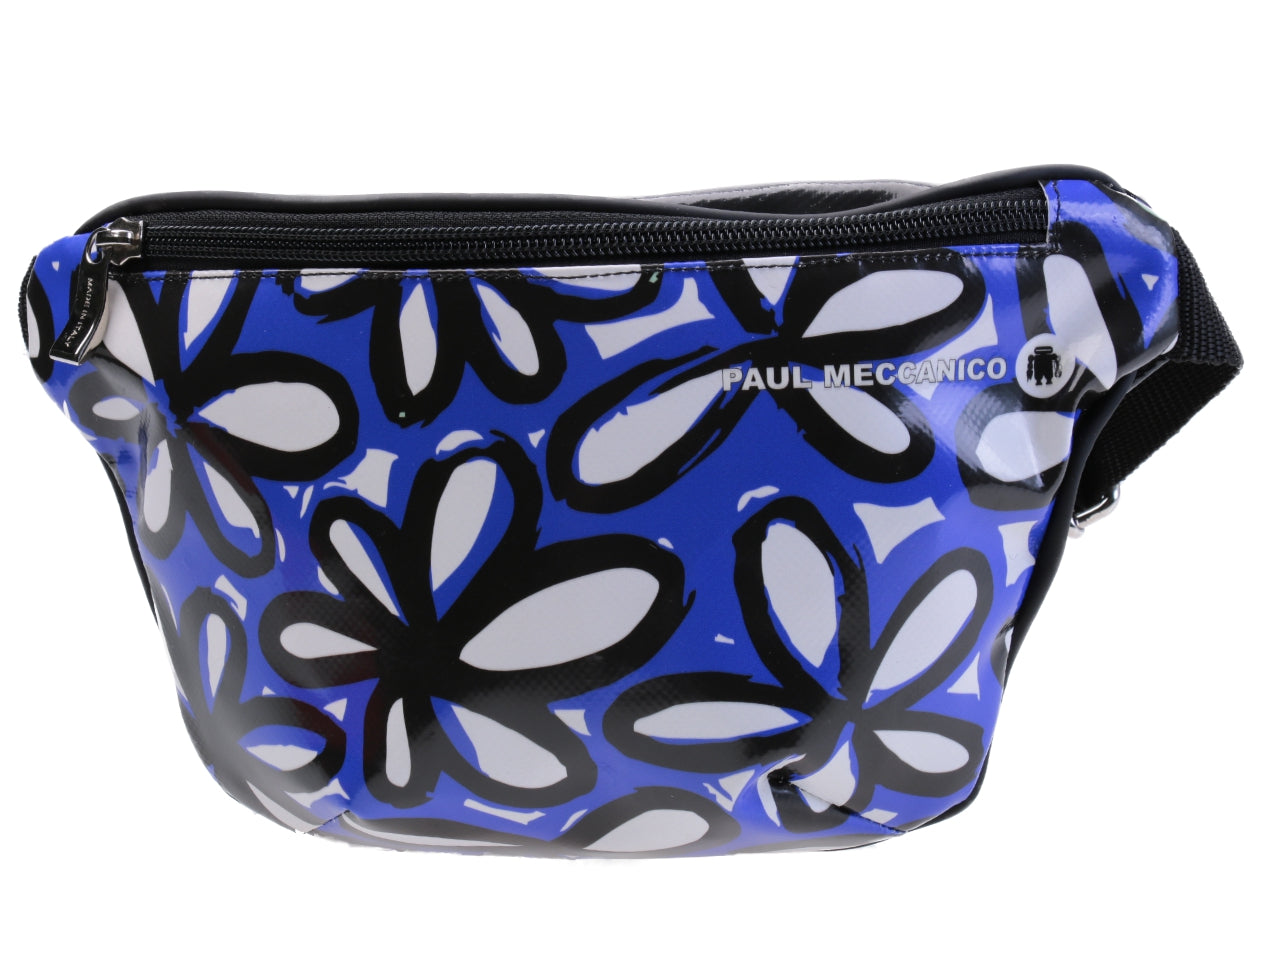 WAIST BAG WHITE, ROYAL AND BLACK WITH FLORAL FANTASY. MODEL FLEX MADE OF LORRY TARPAULIN. - Limited Edition Paul Meccanico